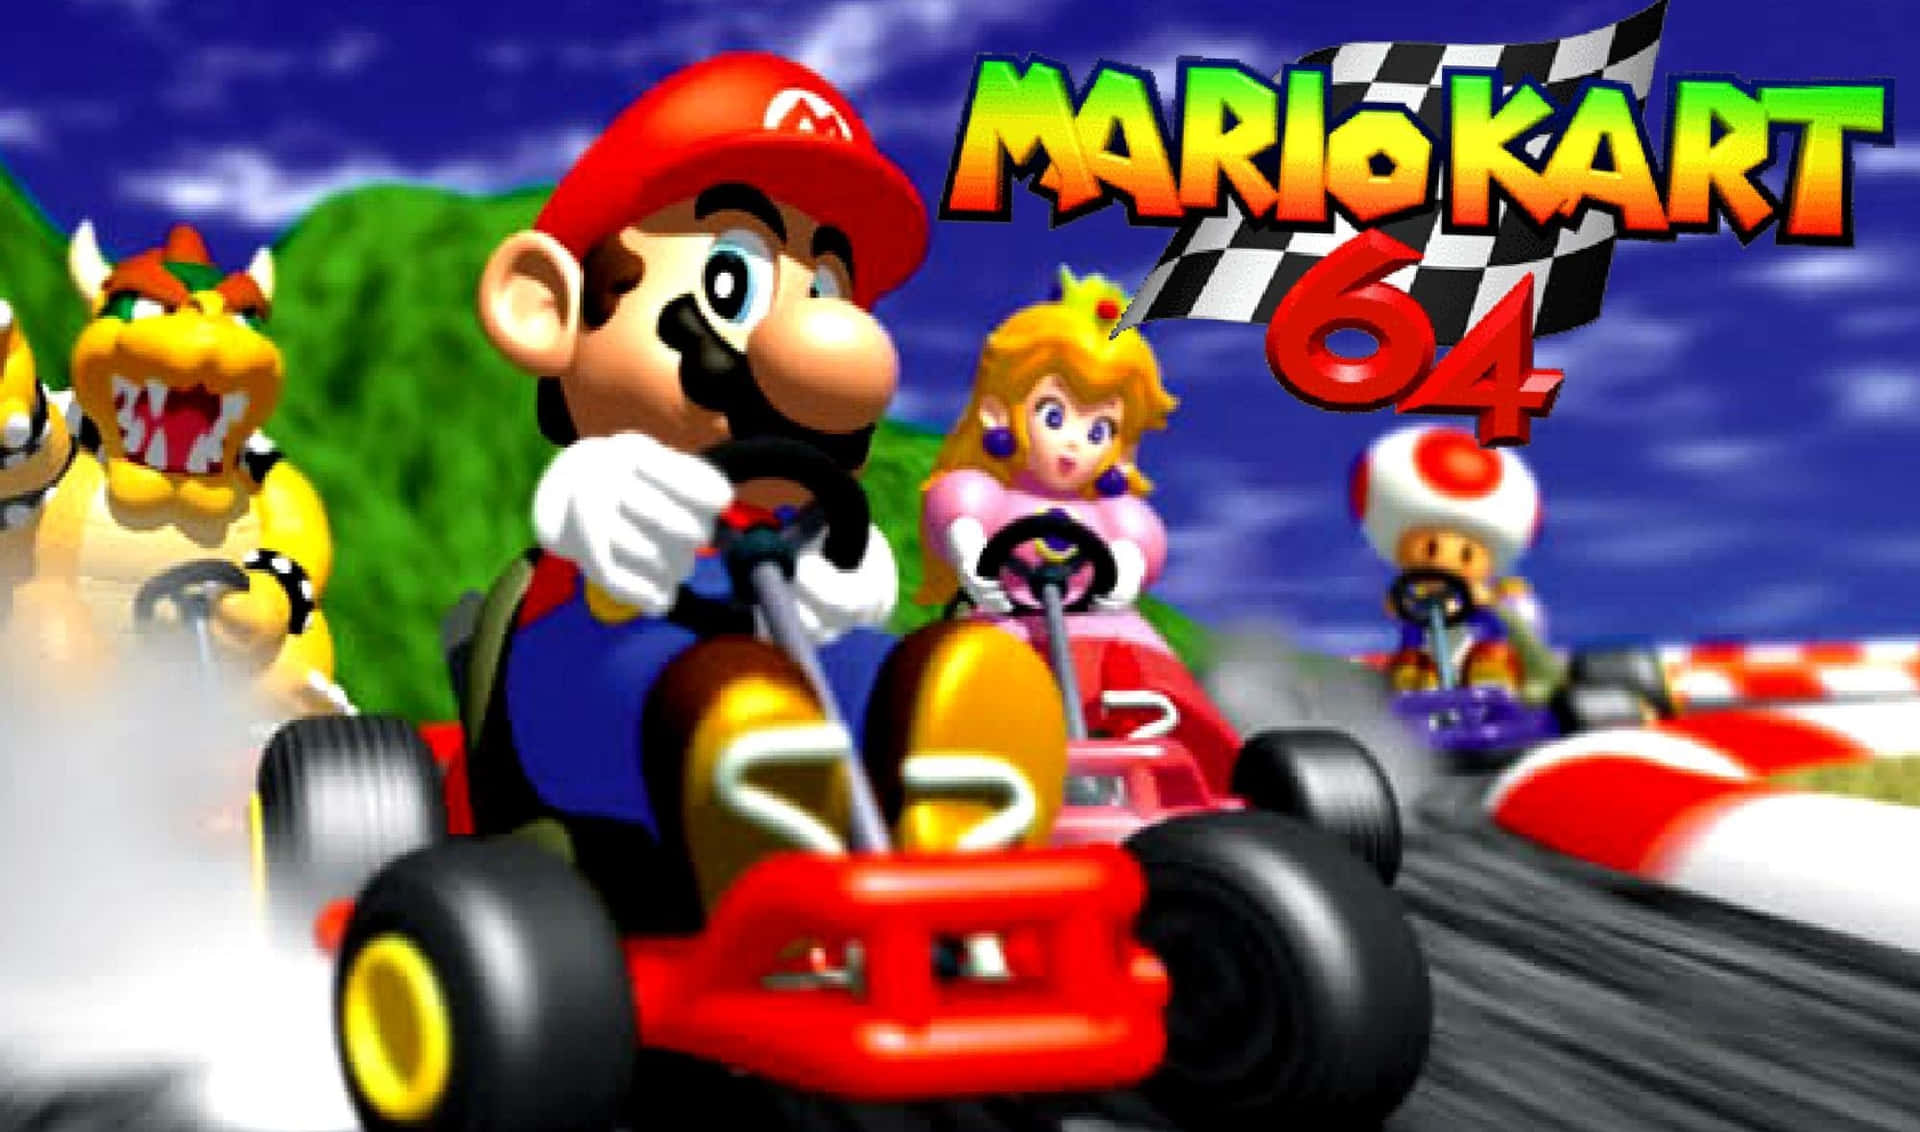 "Mario Kart is an action-packed game full of adventure."